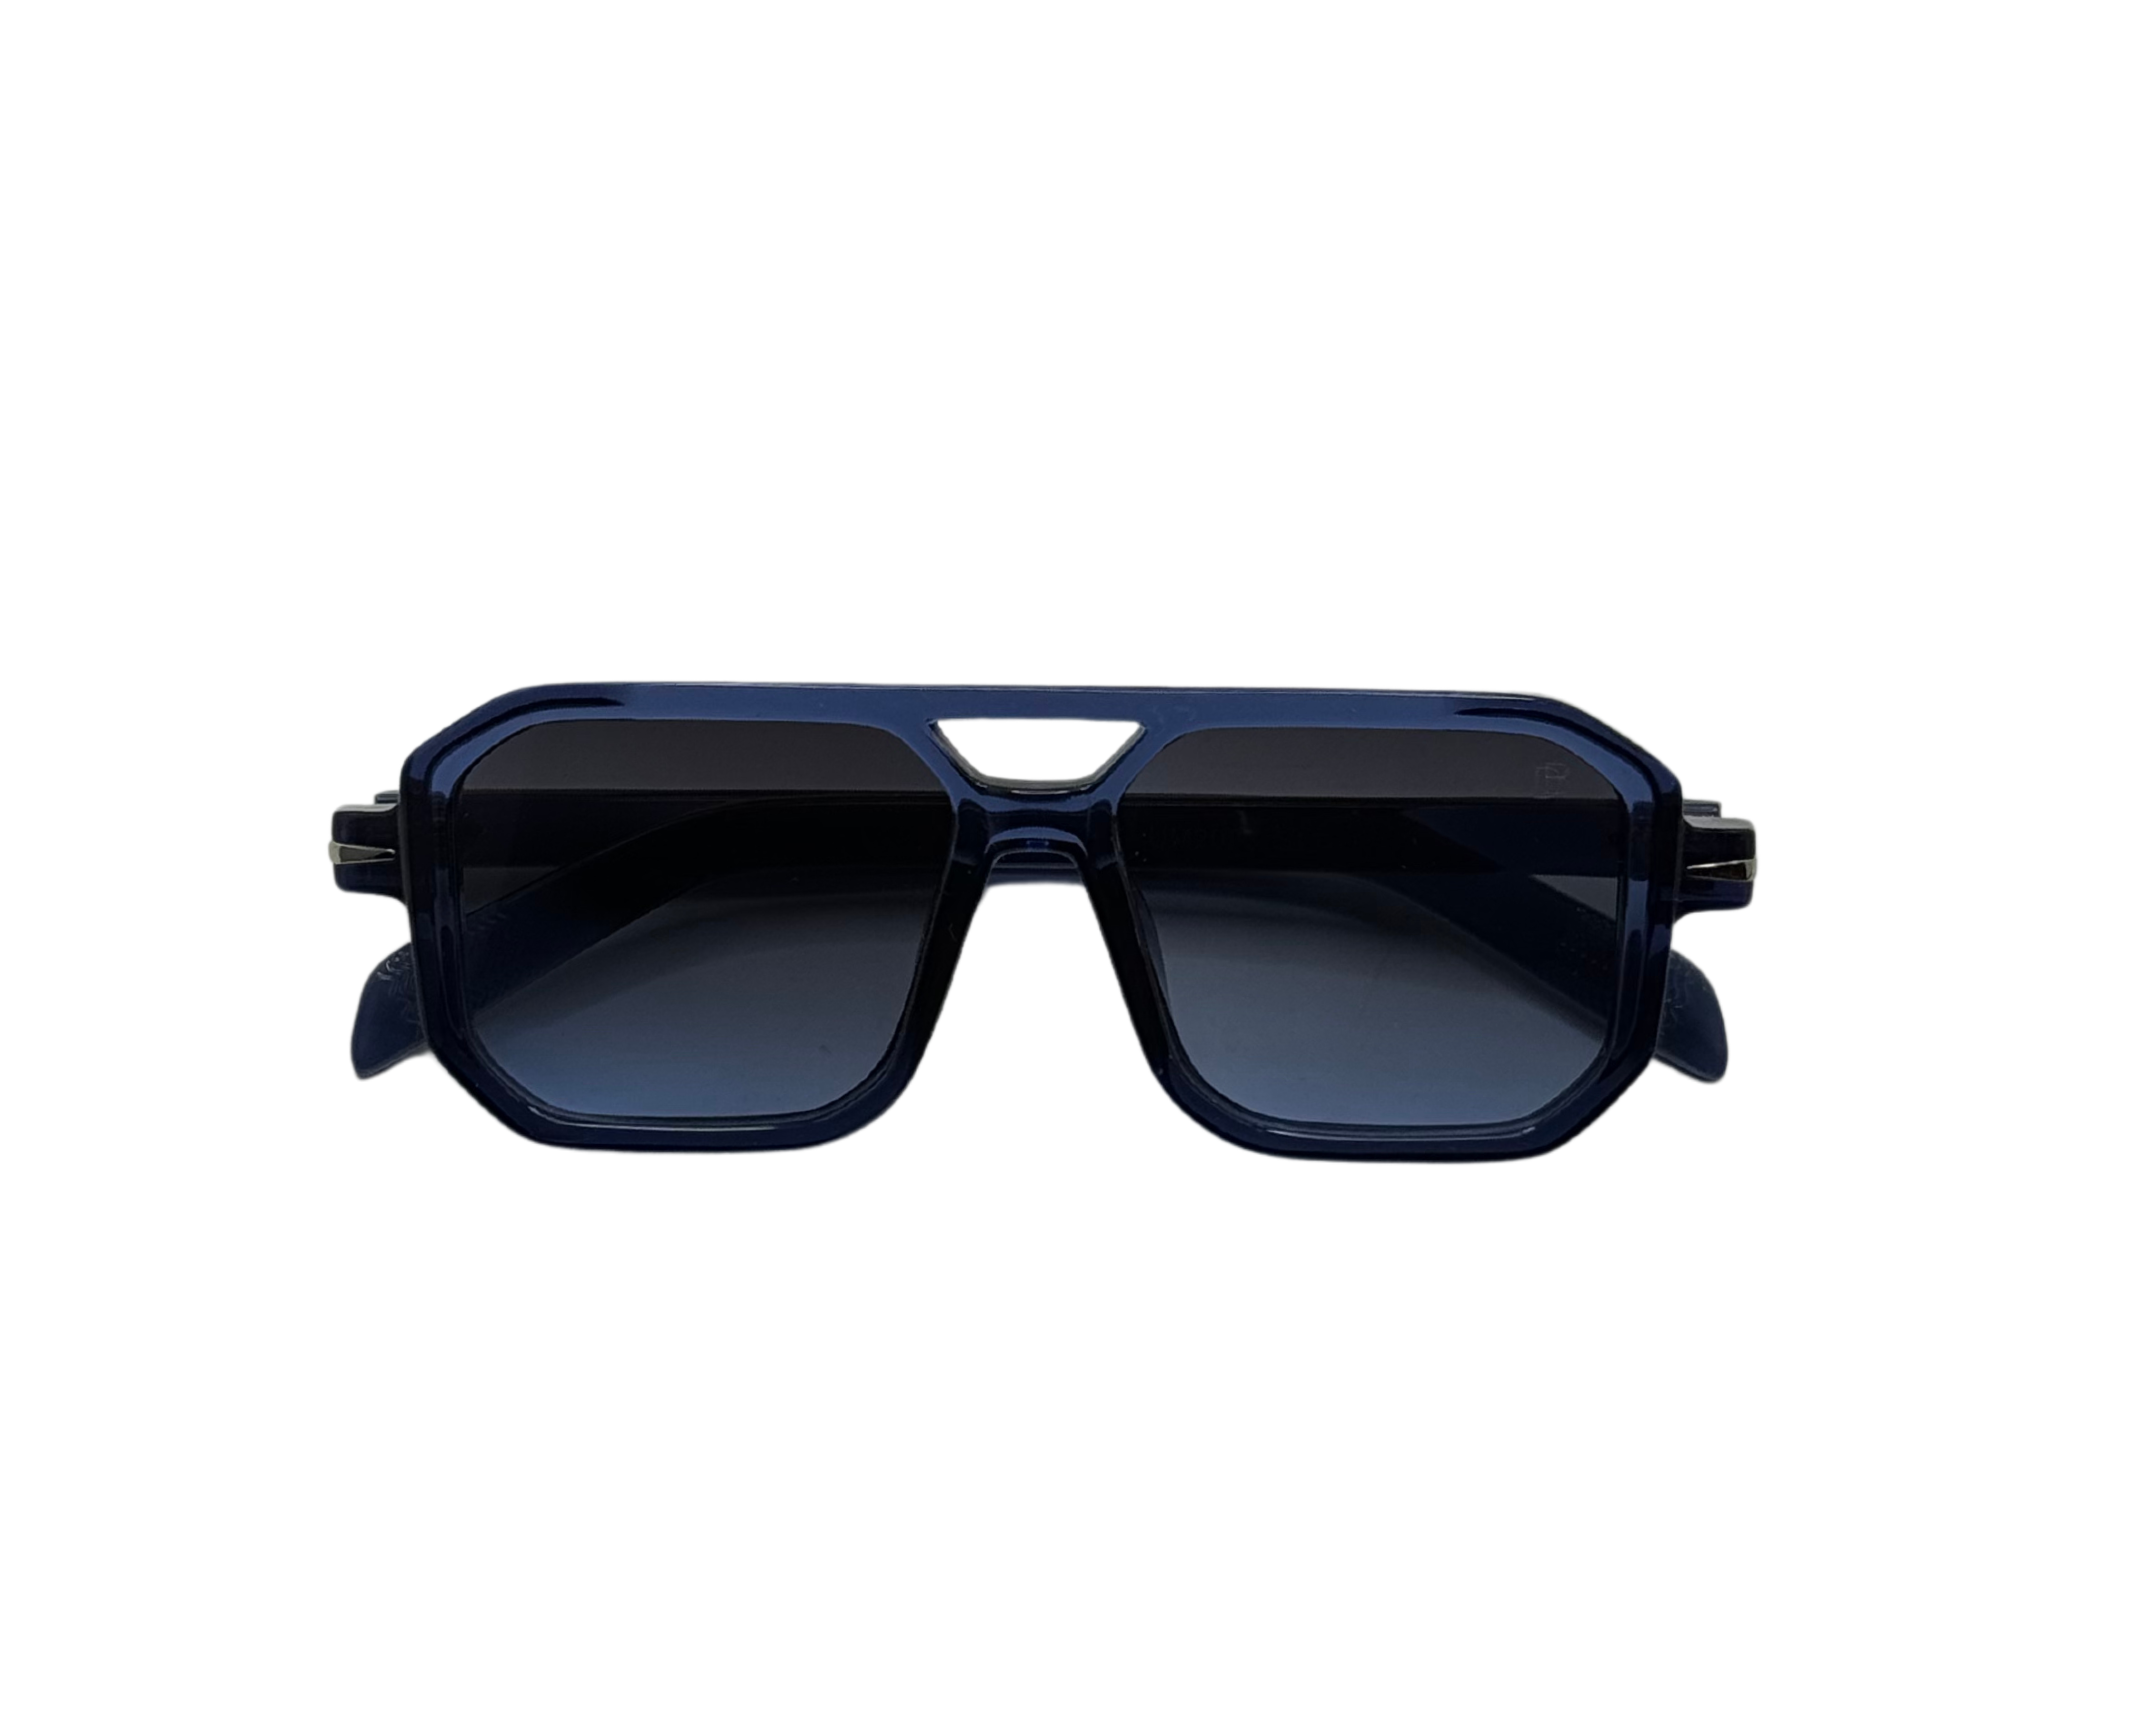 NS Deluxe - 2003 - Blue - Sunglasses